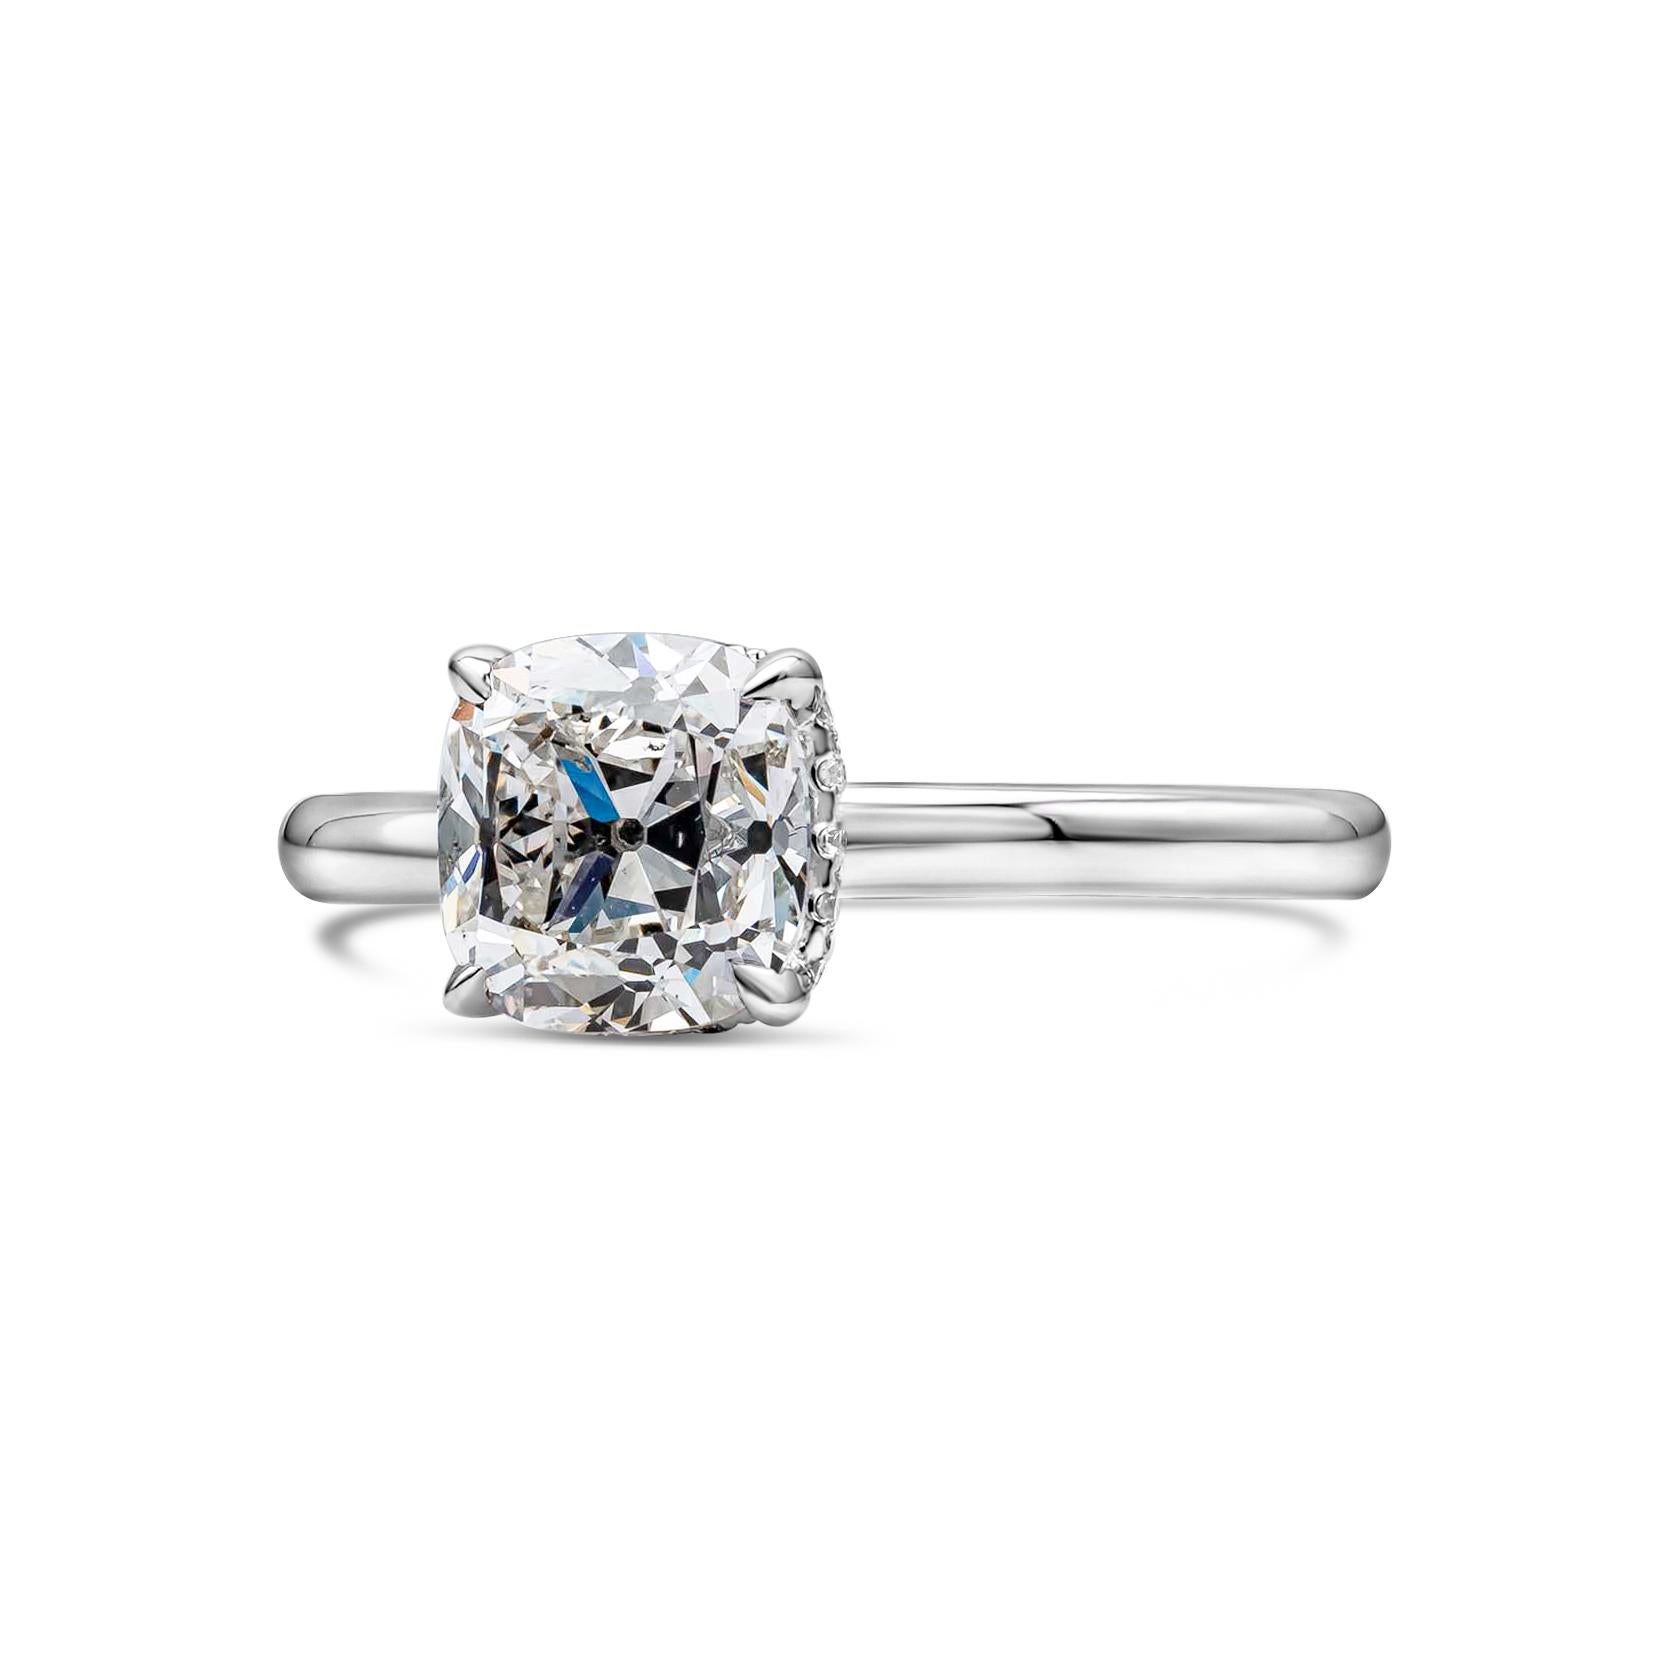 A classic and delicate solitaire engagement ring style showcasing a 1.72 carats antique cushion cut diamond certified by GIA as G color, SI1 clarity. Center diamond set in a classic 18K white gold mounting accented with a brilliant round diamond